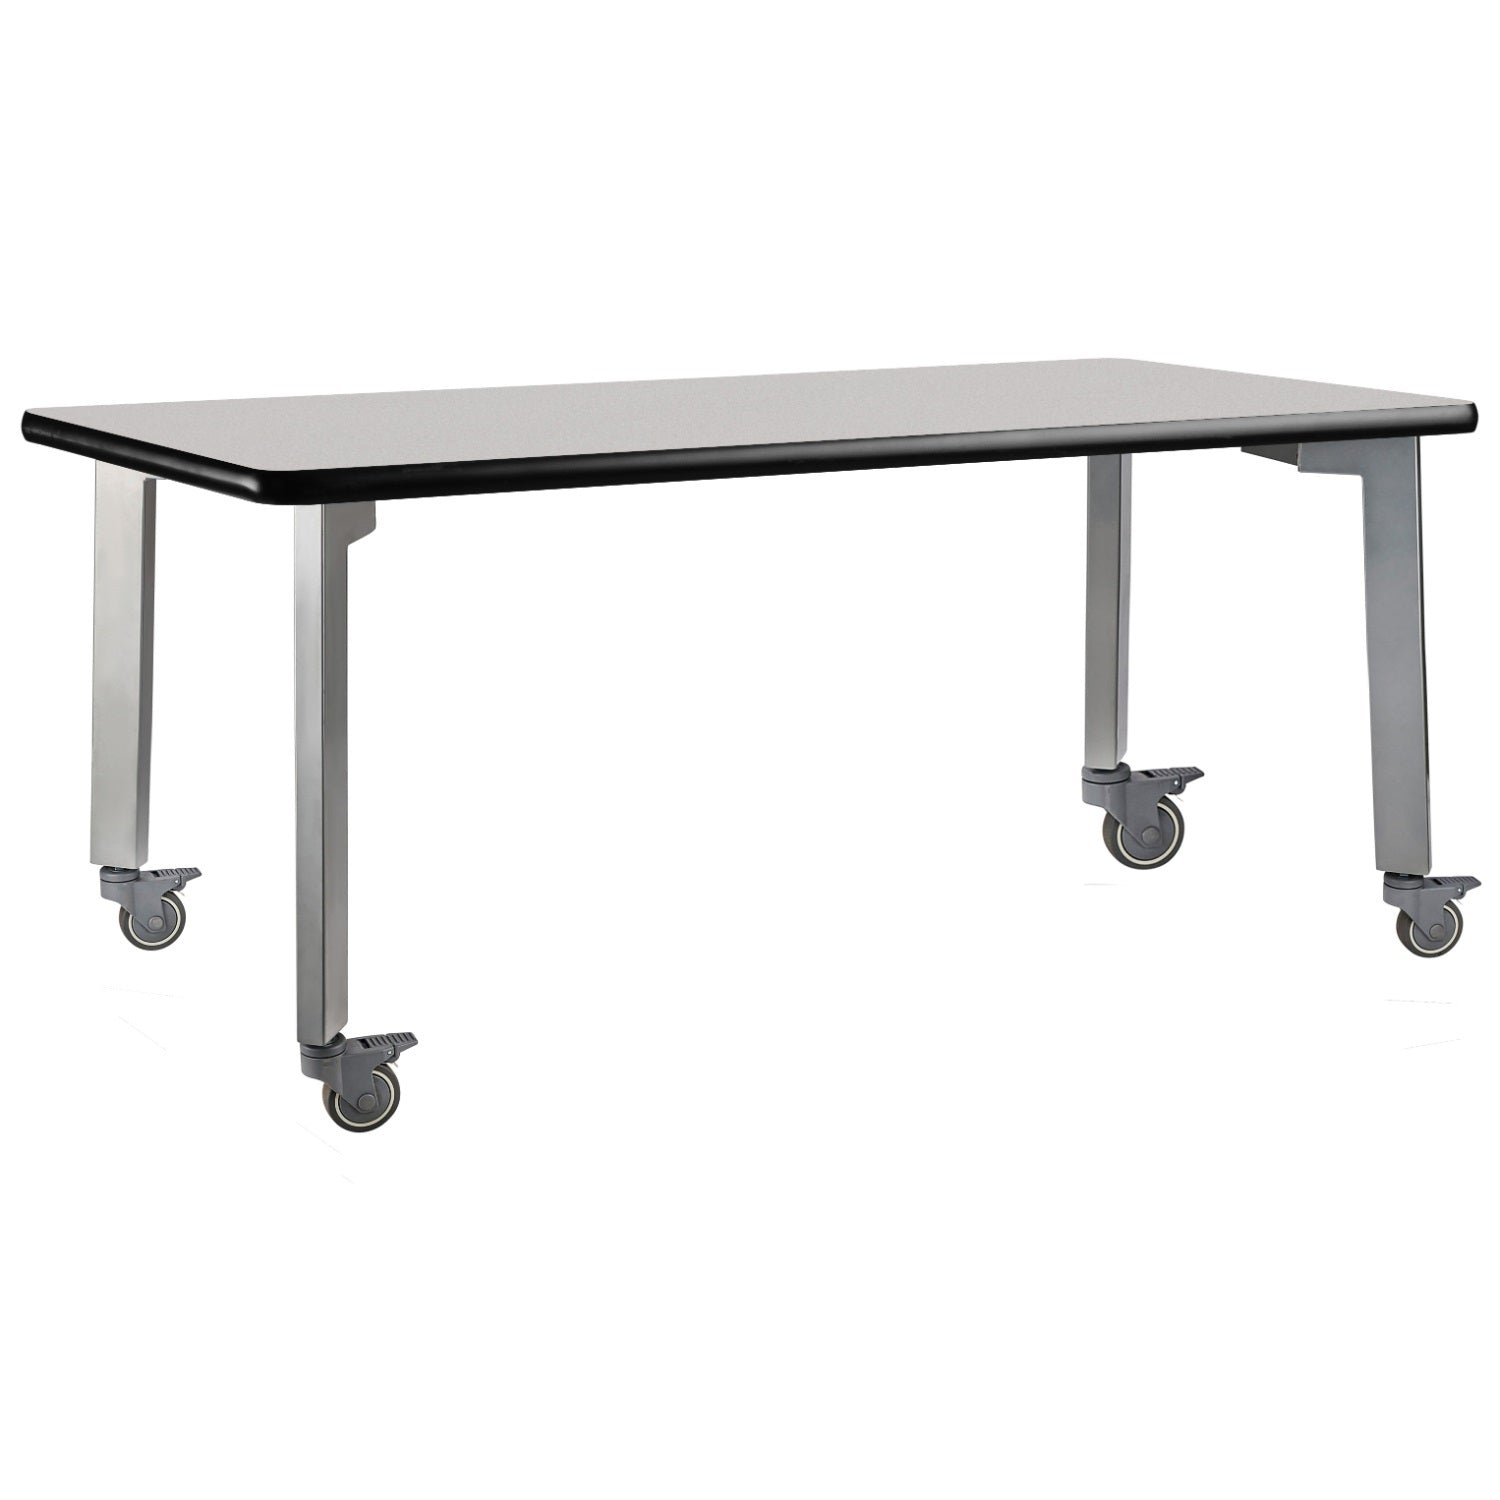 Titan Mobile Table, 48" x 60", Standard High Pressure Laminate Top with Particleboard Core and T-Mold Edge